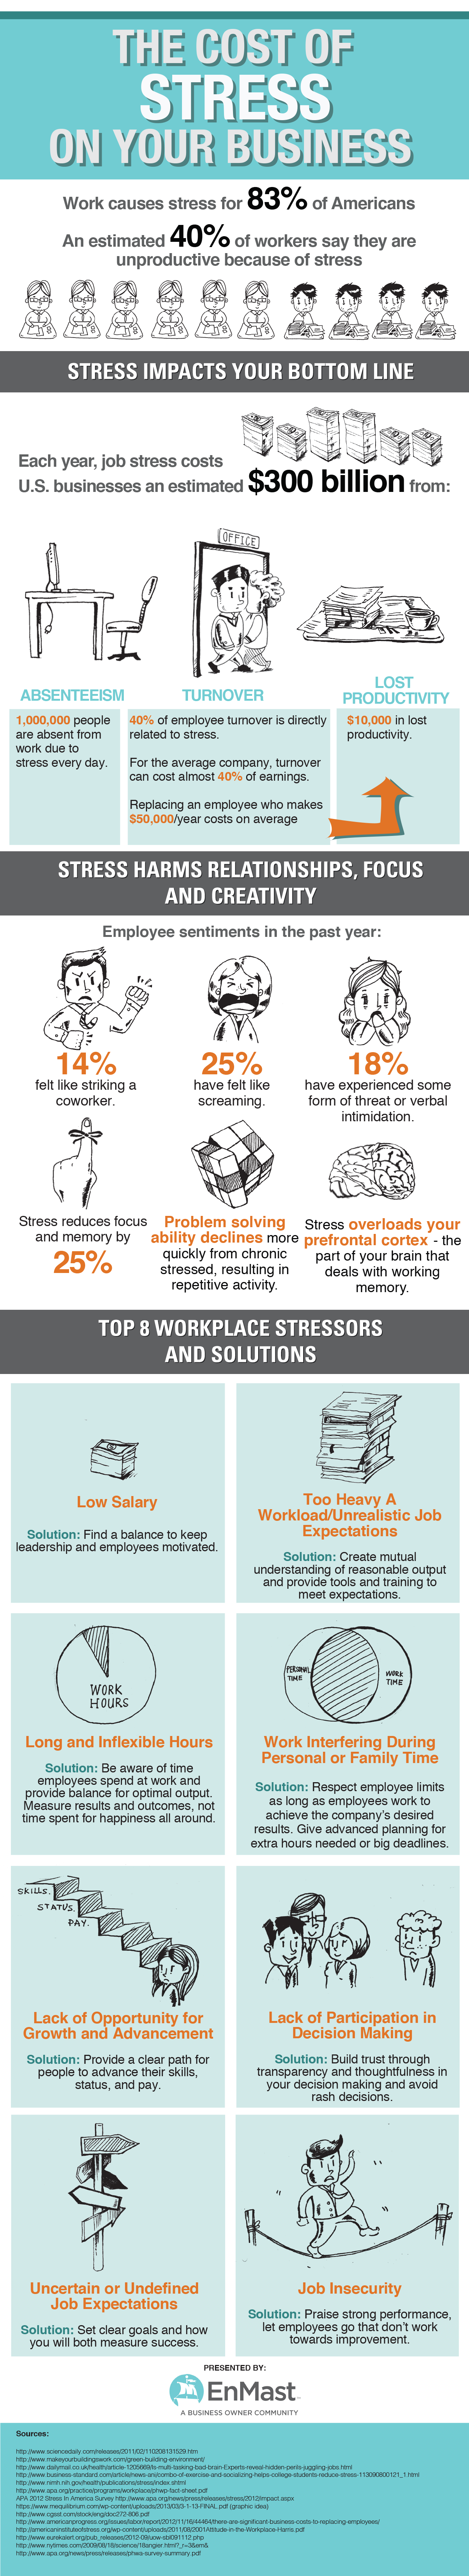 Staggering Cost Of Stress On A Business